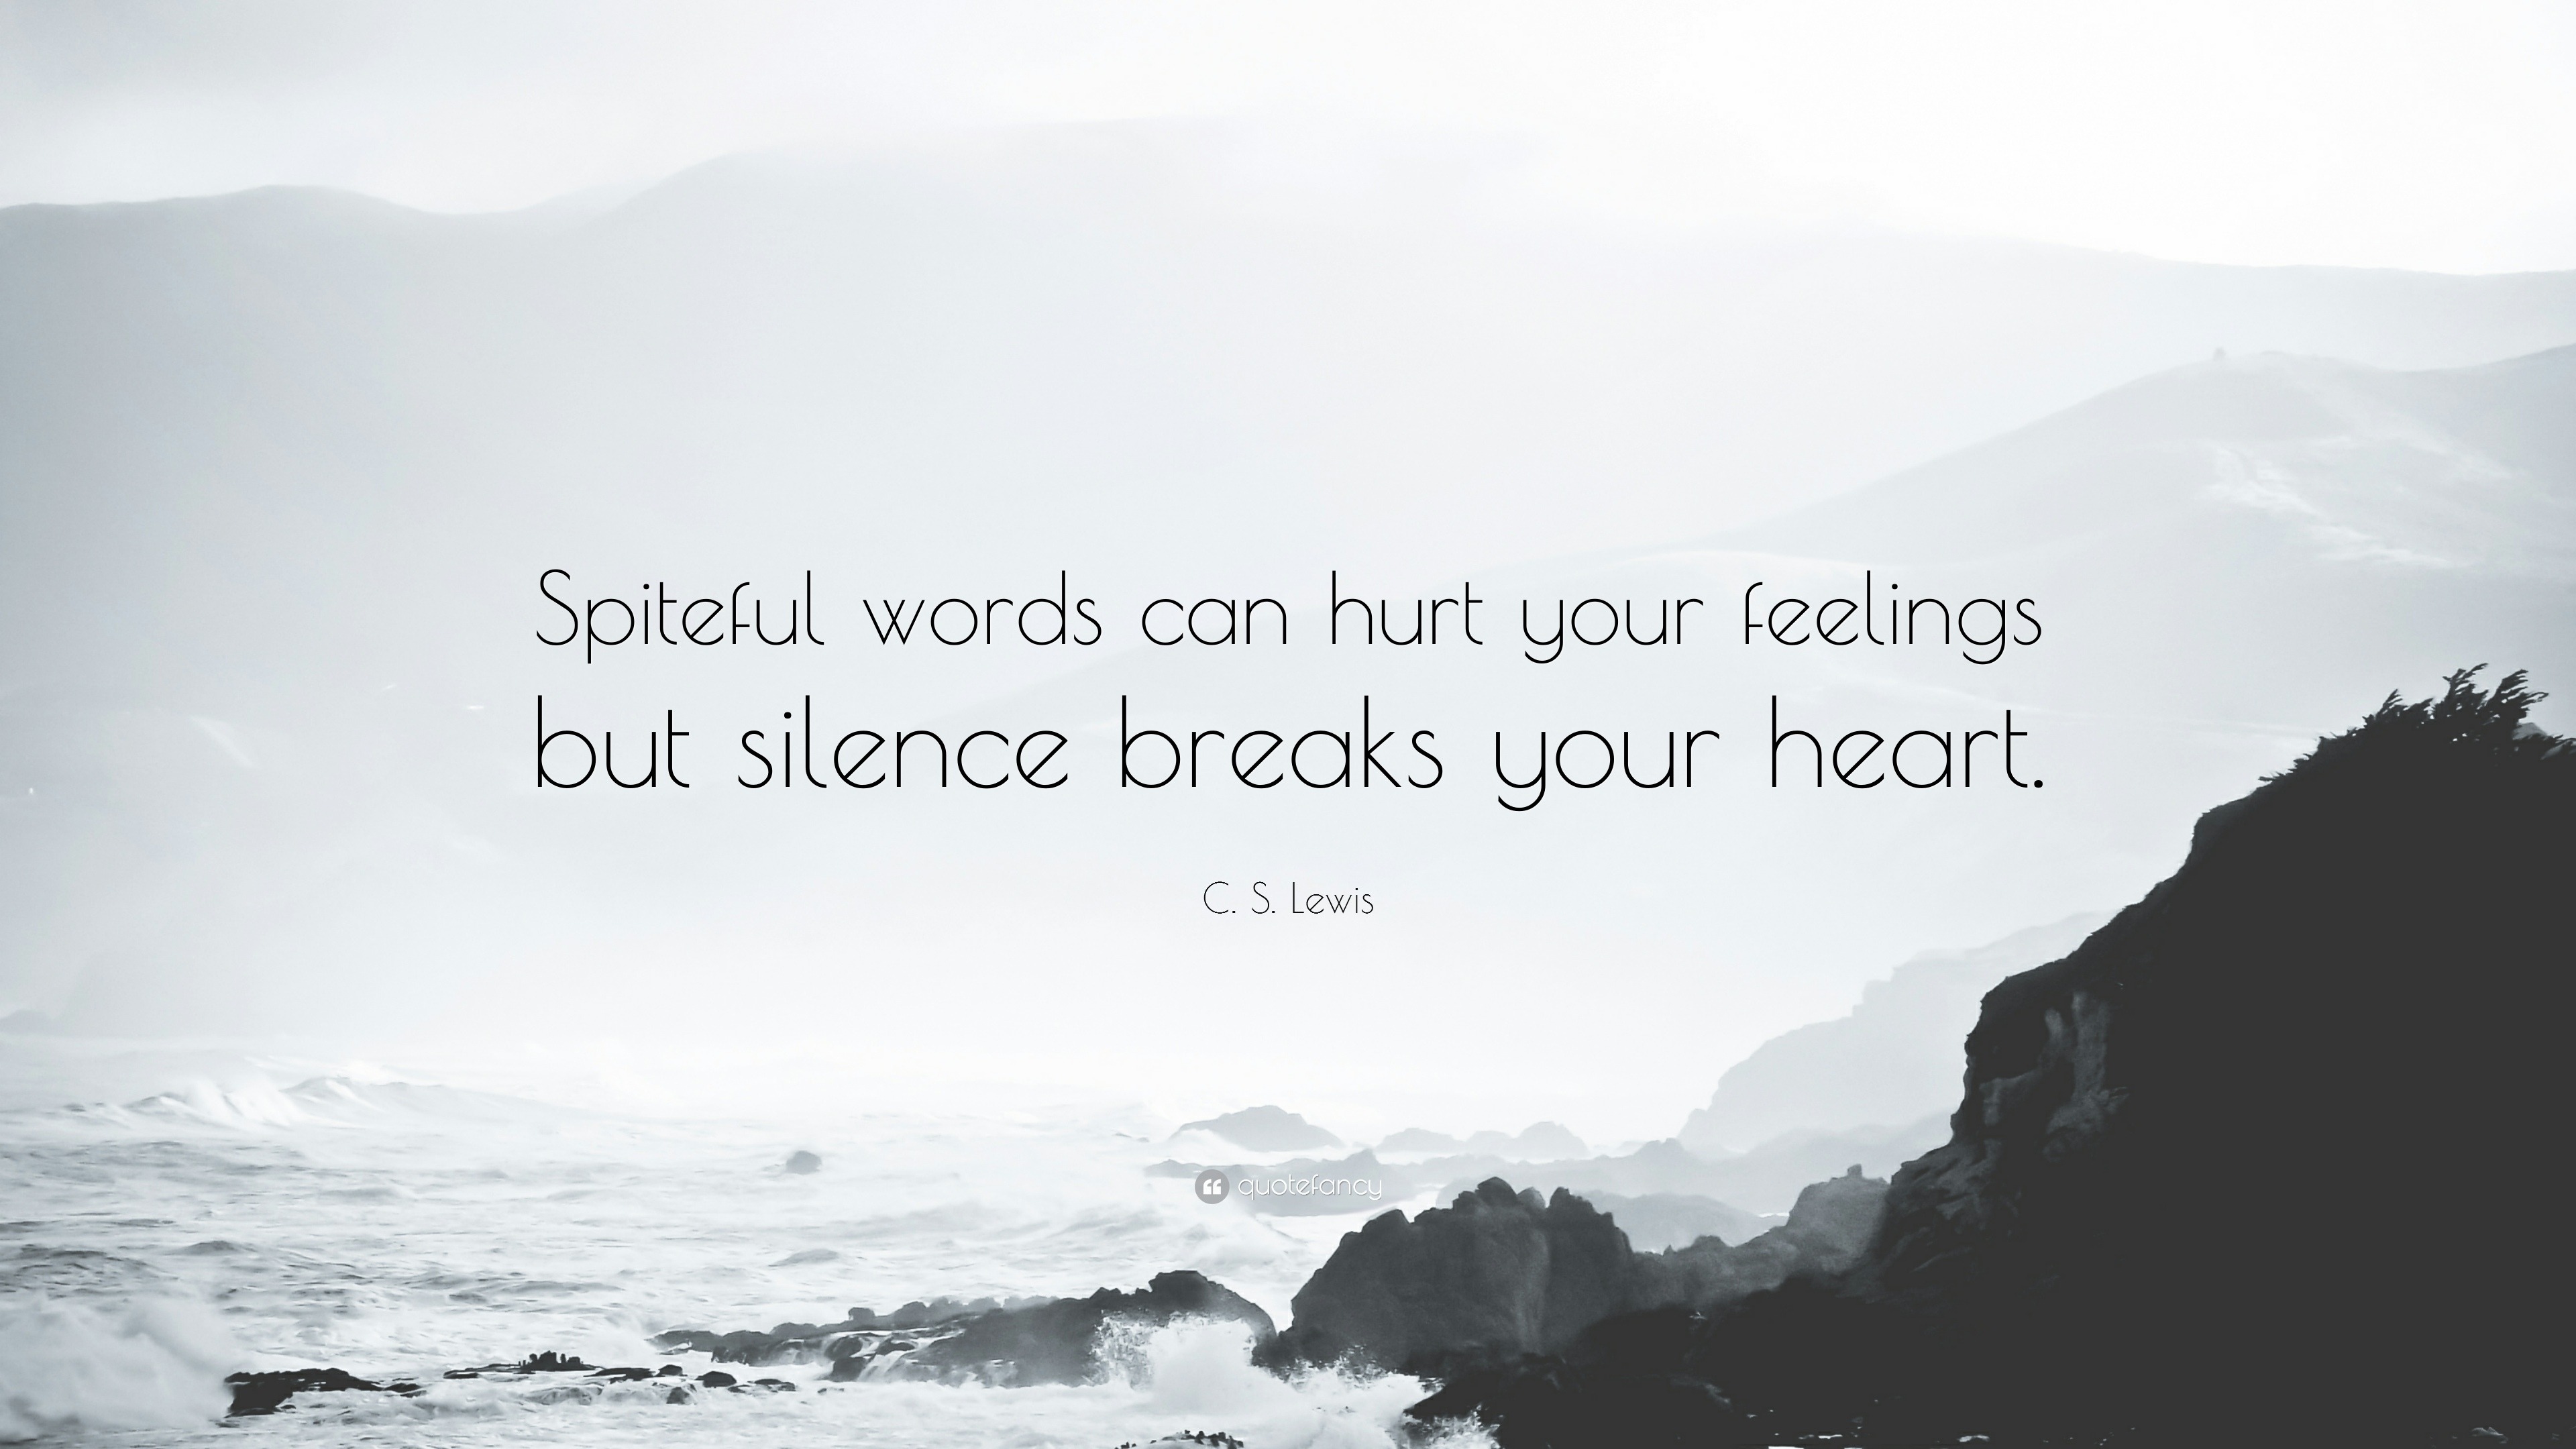 Quotes About Feelings (40 wallpapers) - Quotefancy